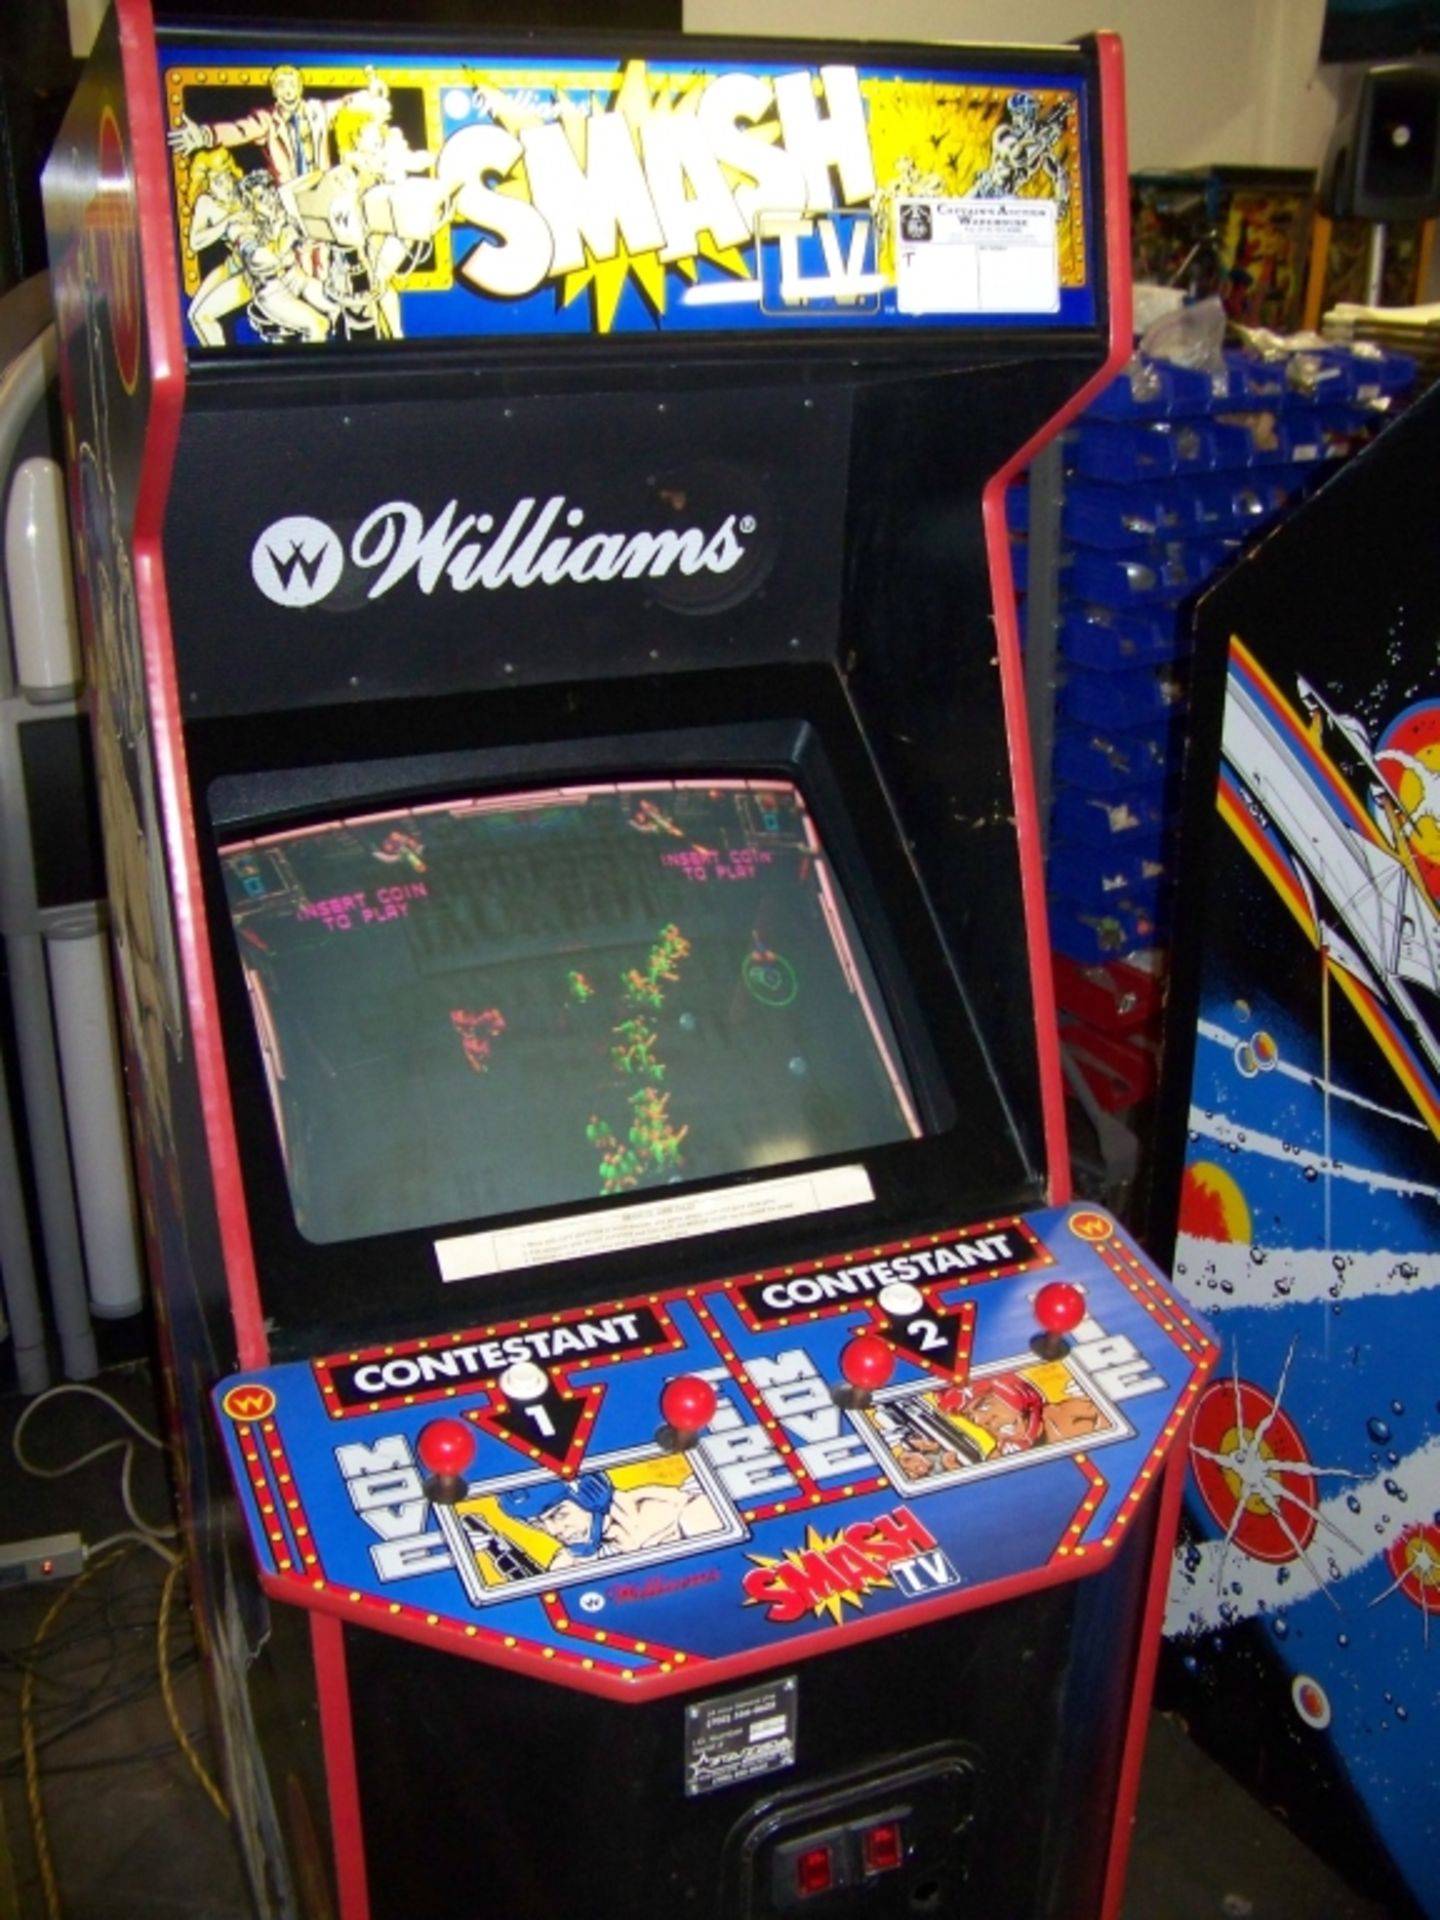 SMASH TV CLASSIC ARCADE GAME WILLIAMS Item is in used condition. Evidence of wear and commercial - Image 2 of 9